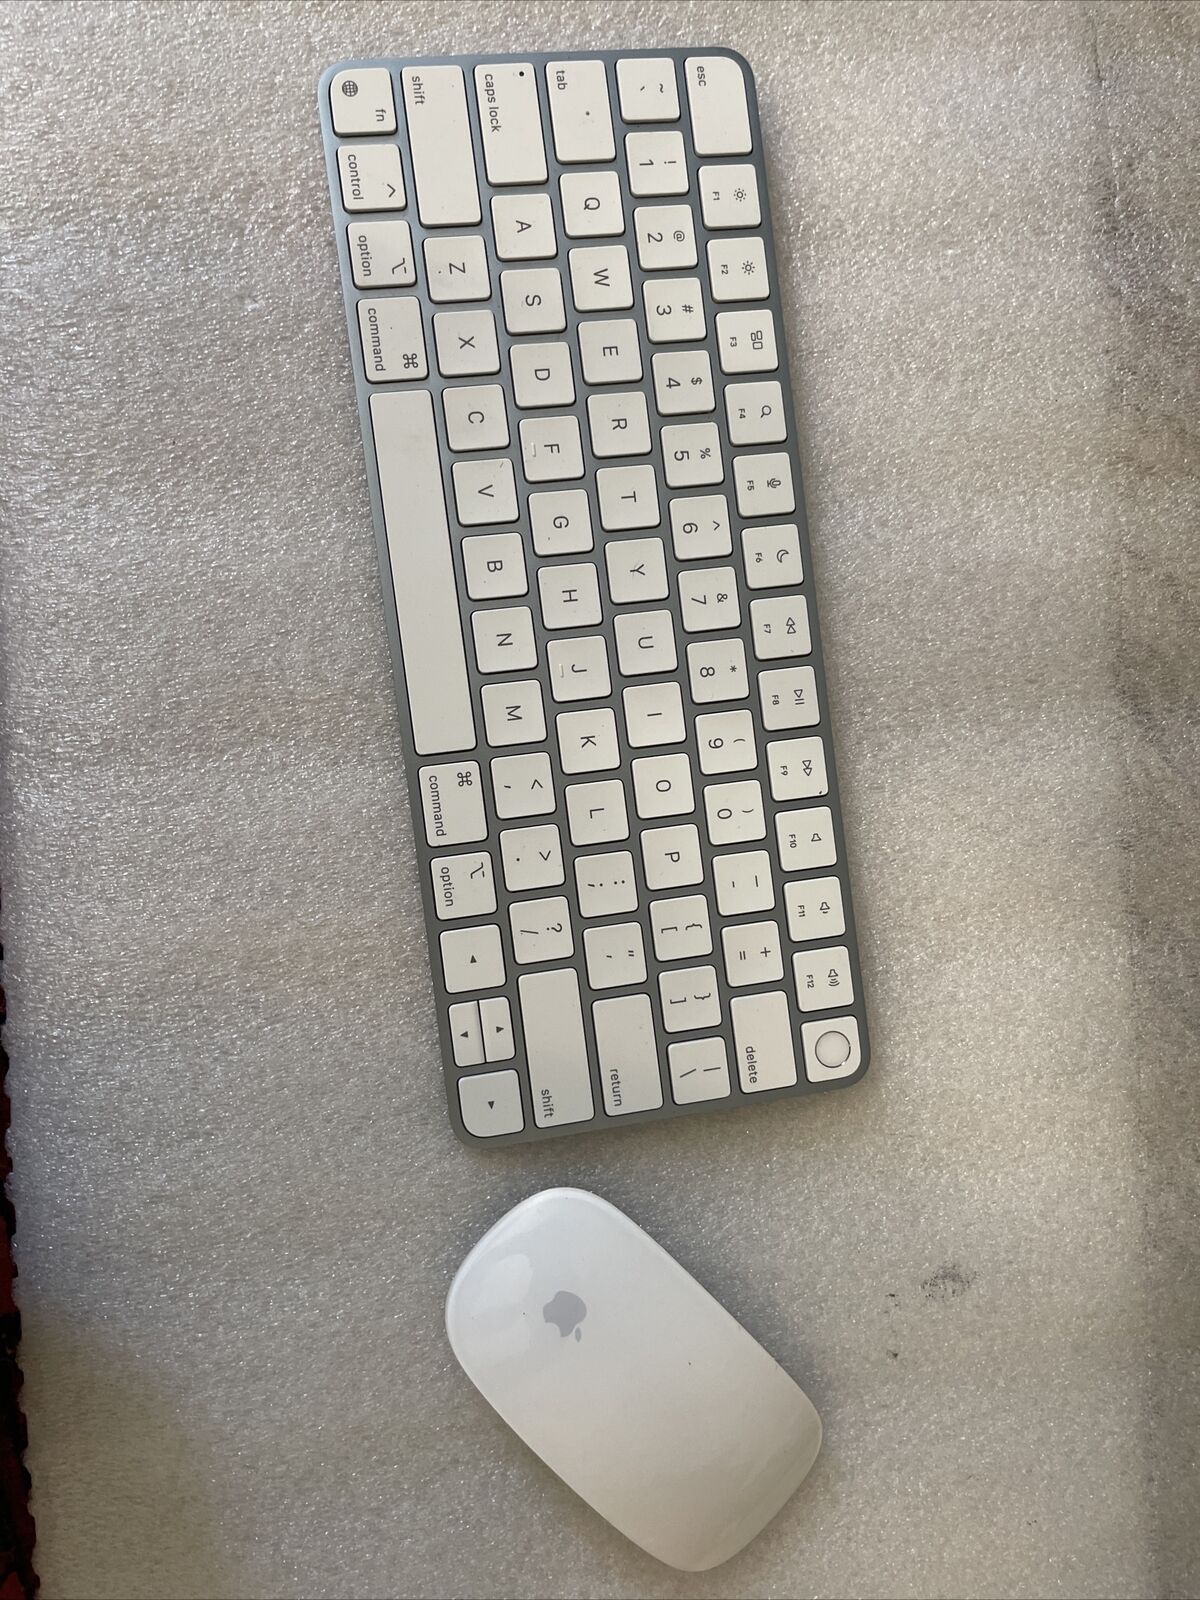 (COMBO DEAL ) Apple Magic Keyboard with Touch ID and Apple Wireless Mouse 2✅